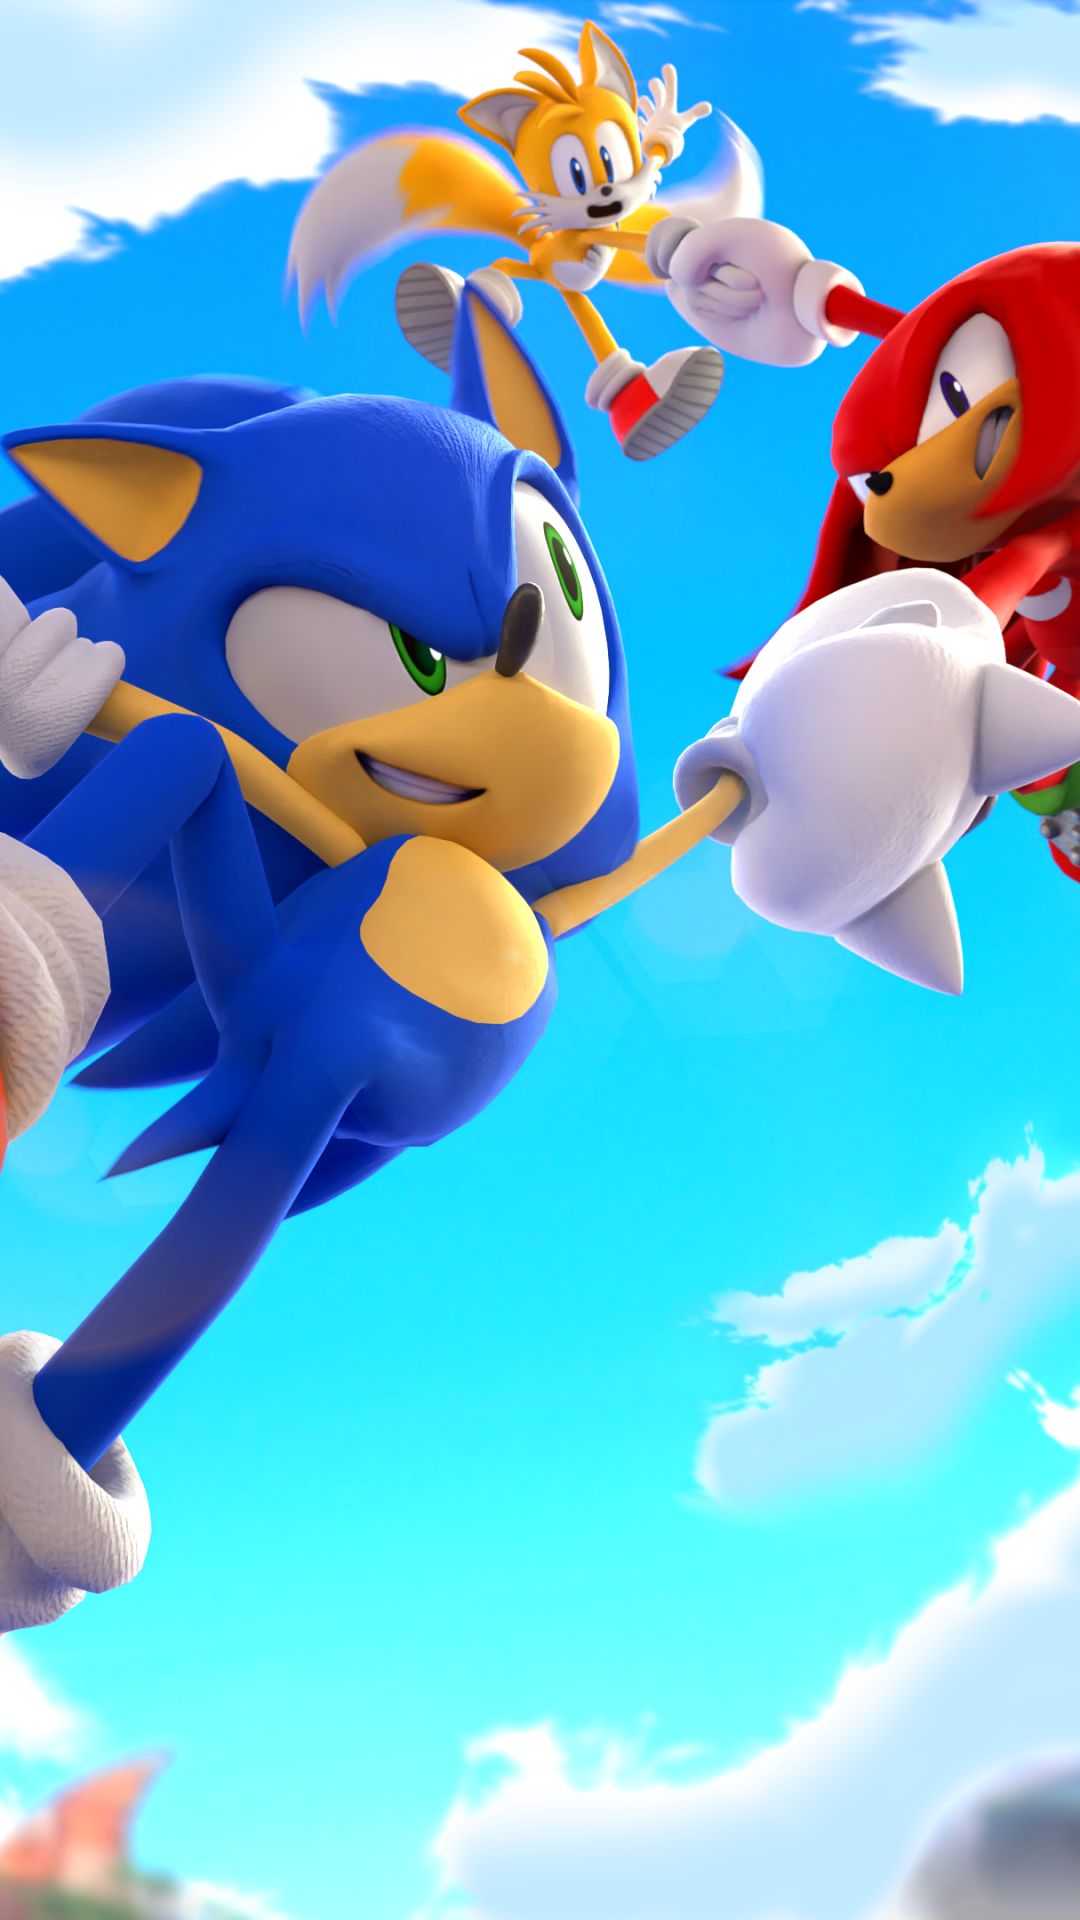 sonic heroes, video game, sonic the hedgehog, knuckles the echidna, miles 'tails' prower, sonic